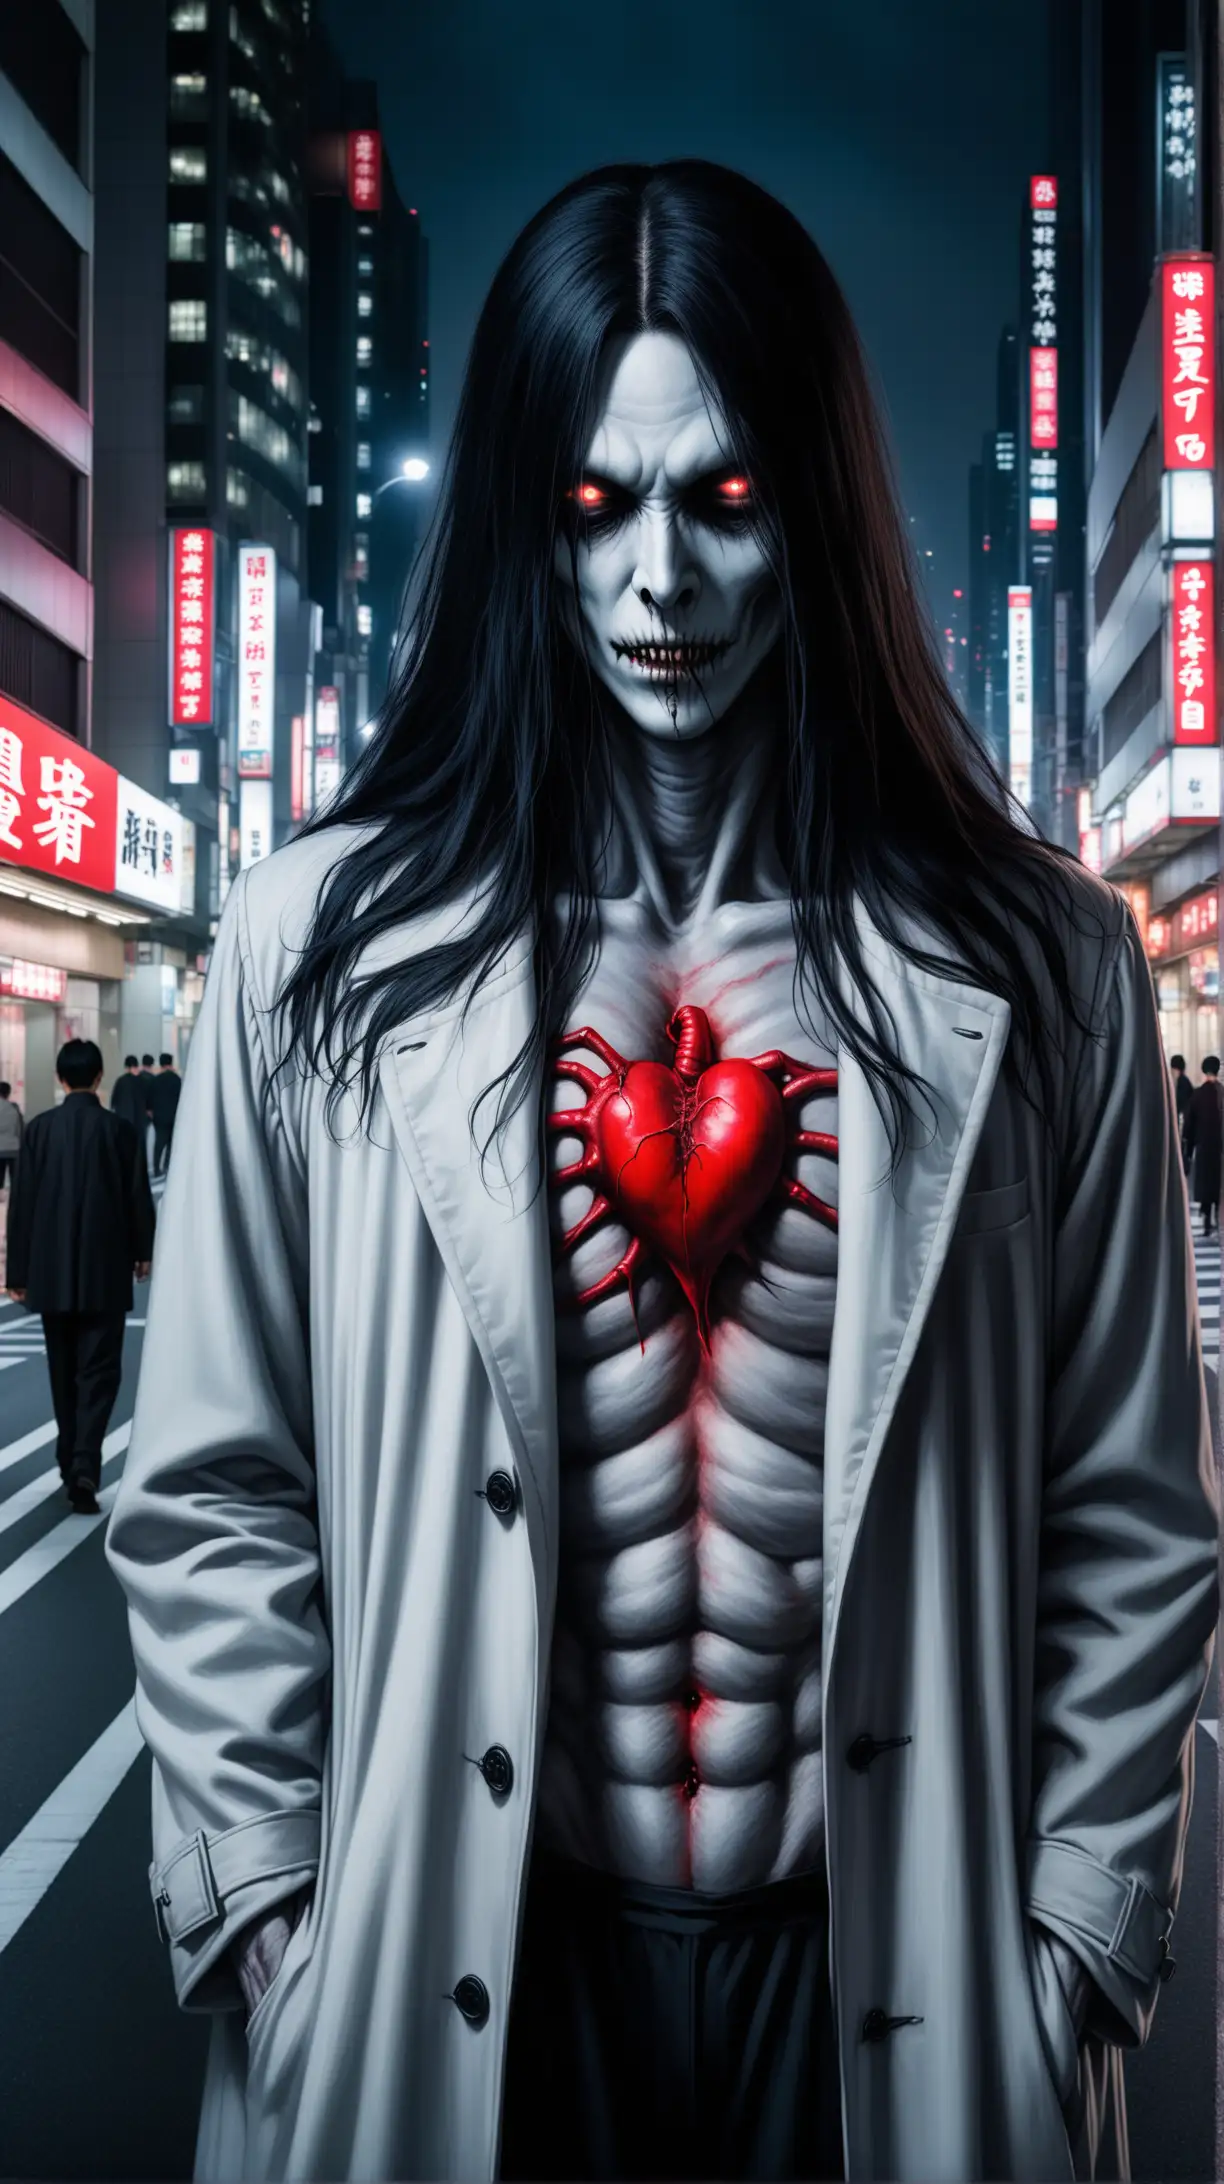 Ethereal Ghoul with Red Heart on Tokyos Empty Night Streets